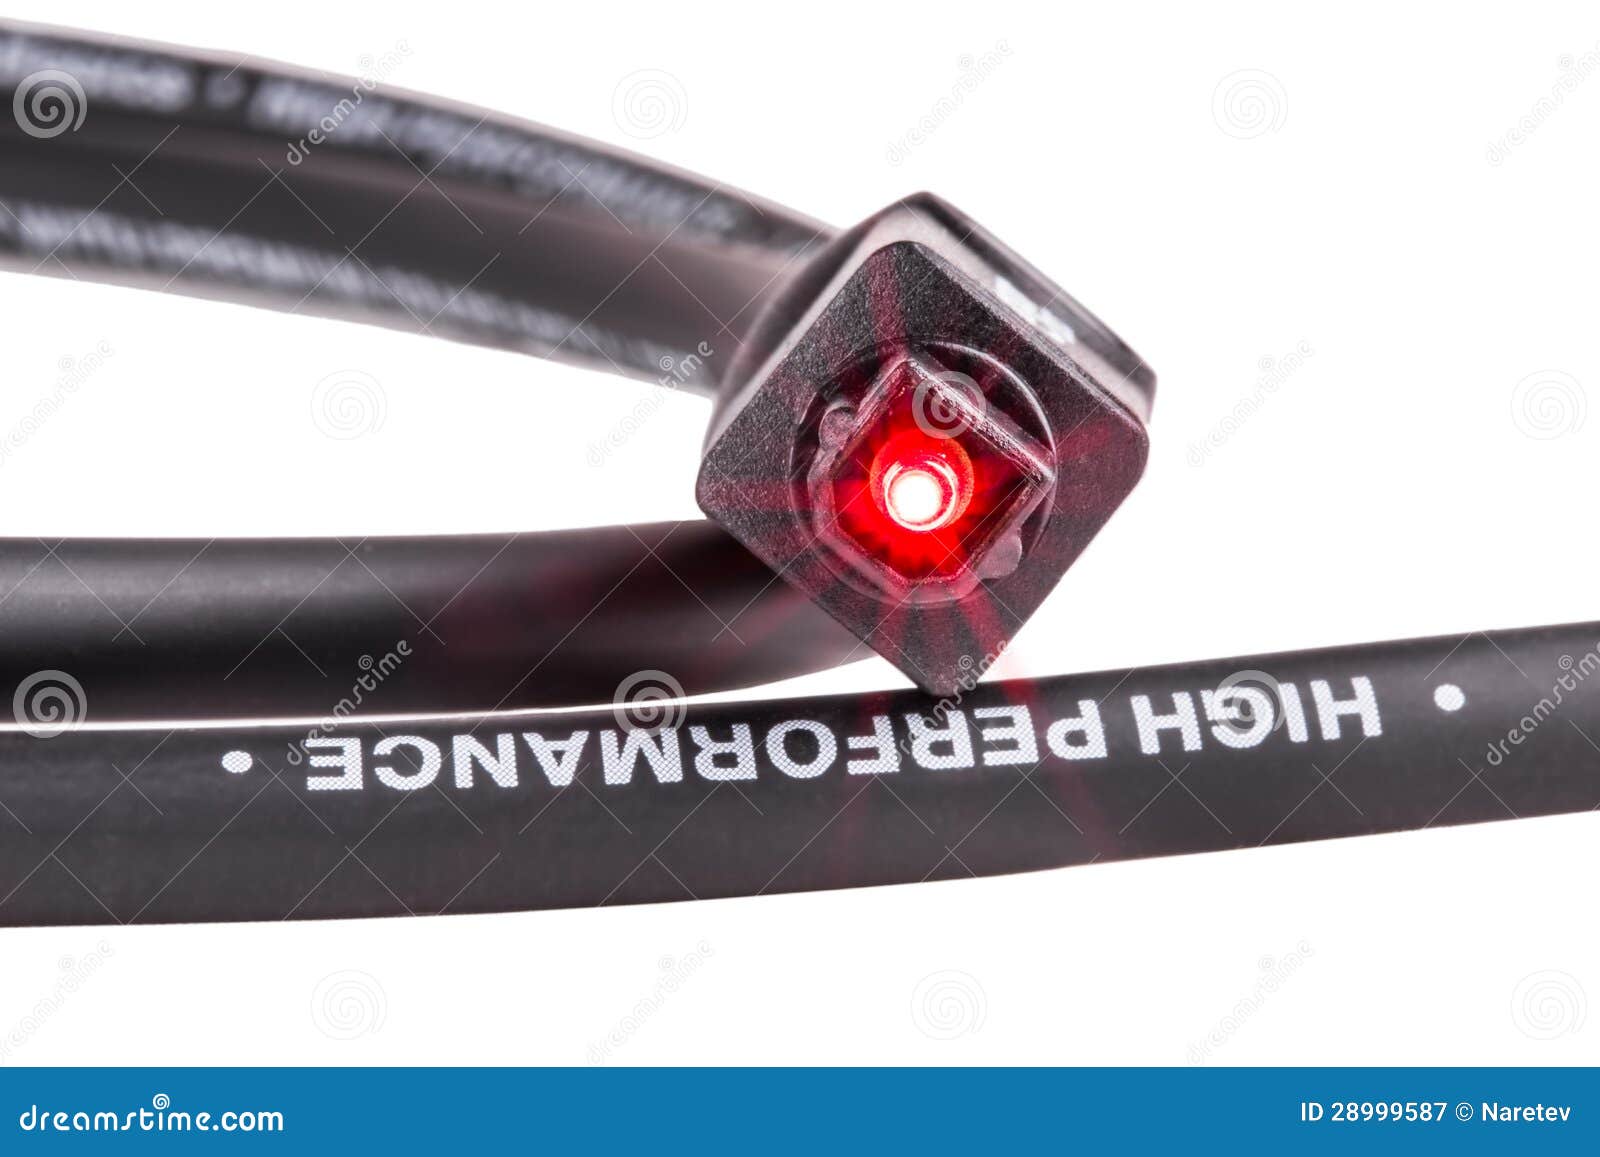 optical-audio-cable-28999587.jpg